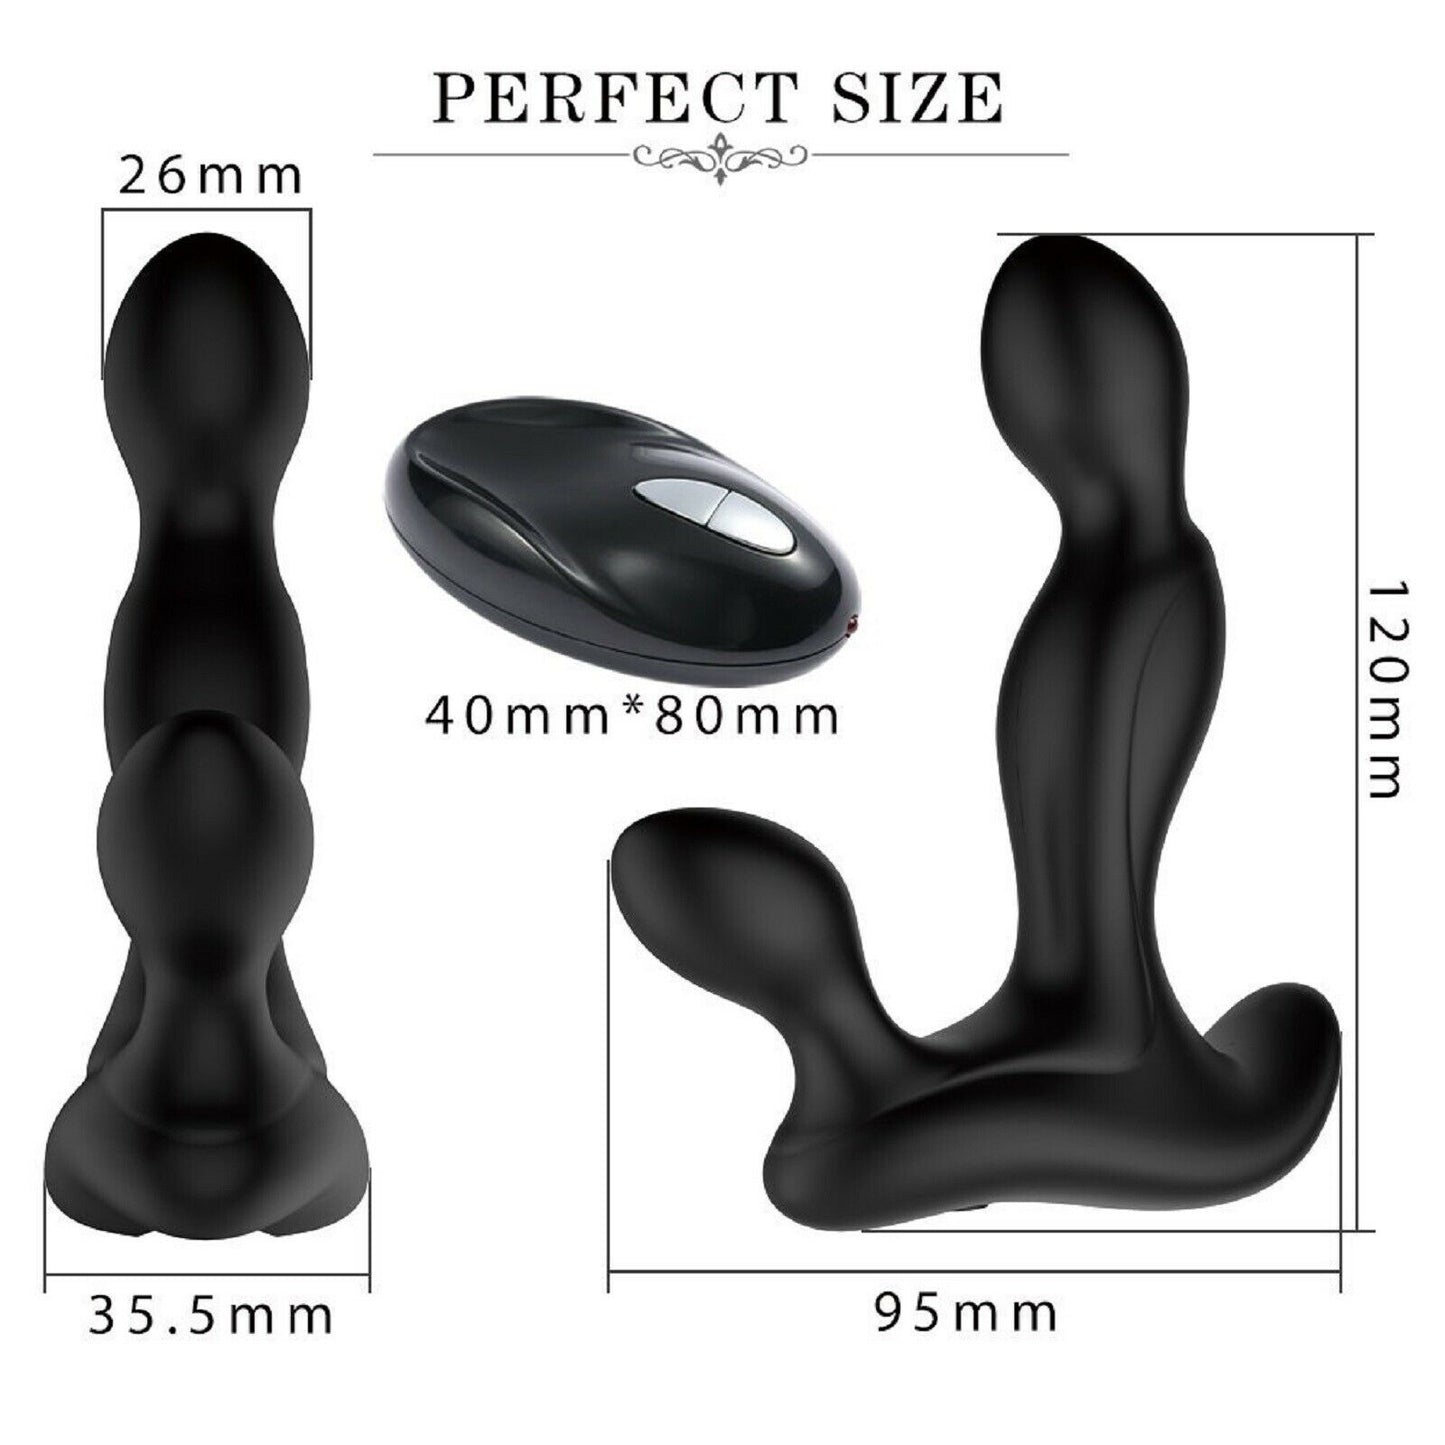 Prostate Massager Anal Butt Plug Mens Vibrator Perineum USB Gay Adult Sex Toy